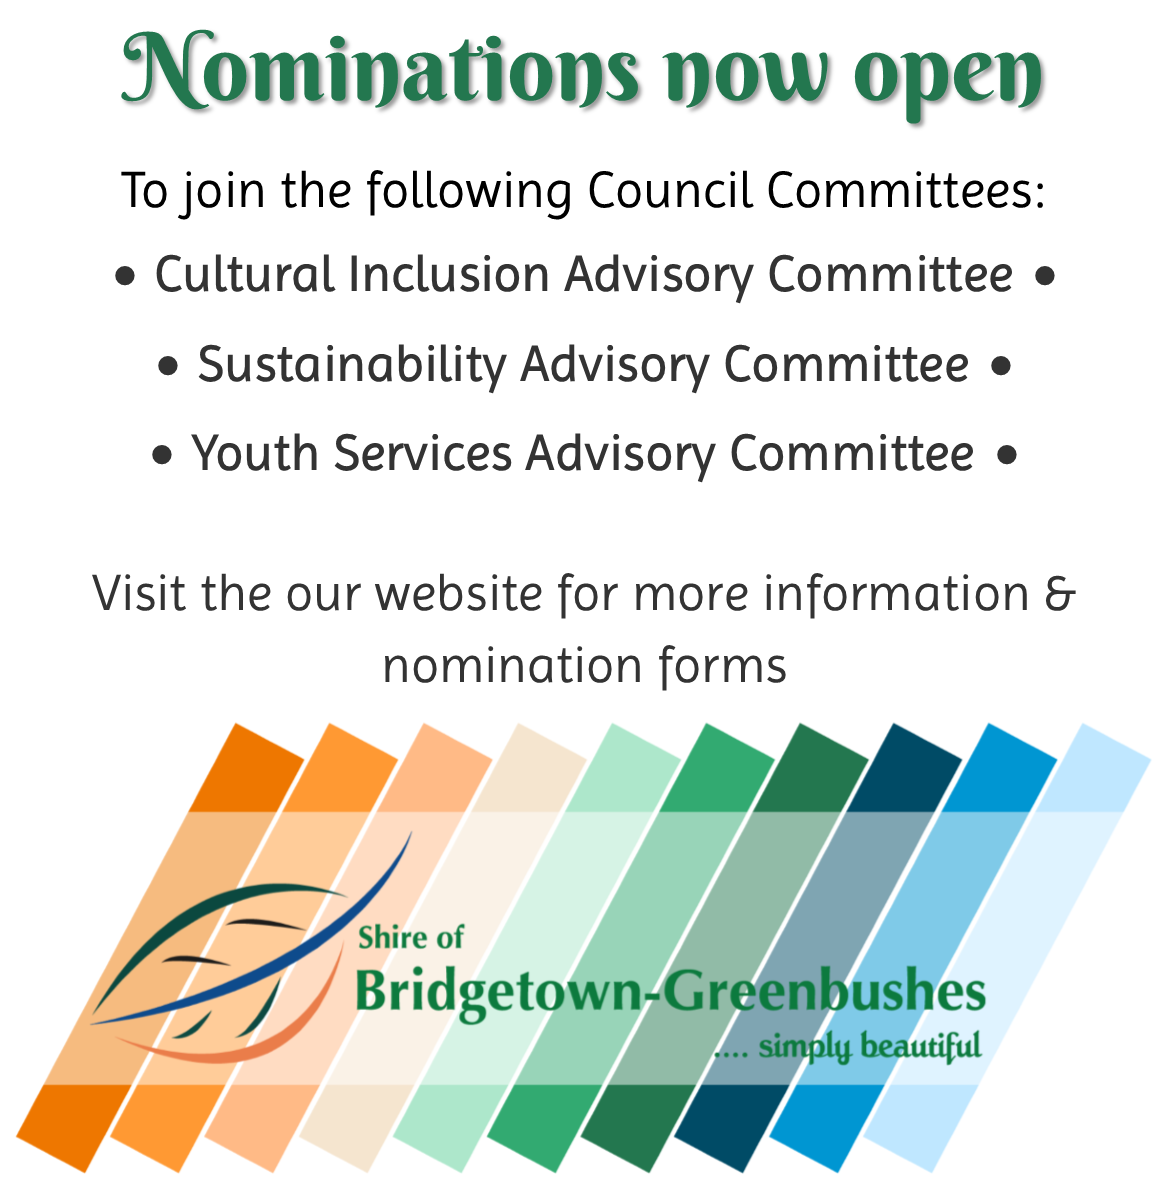 Council Committee Nominations